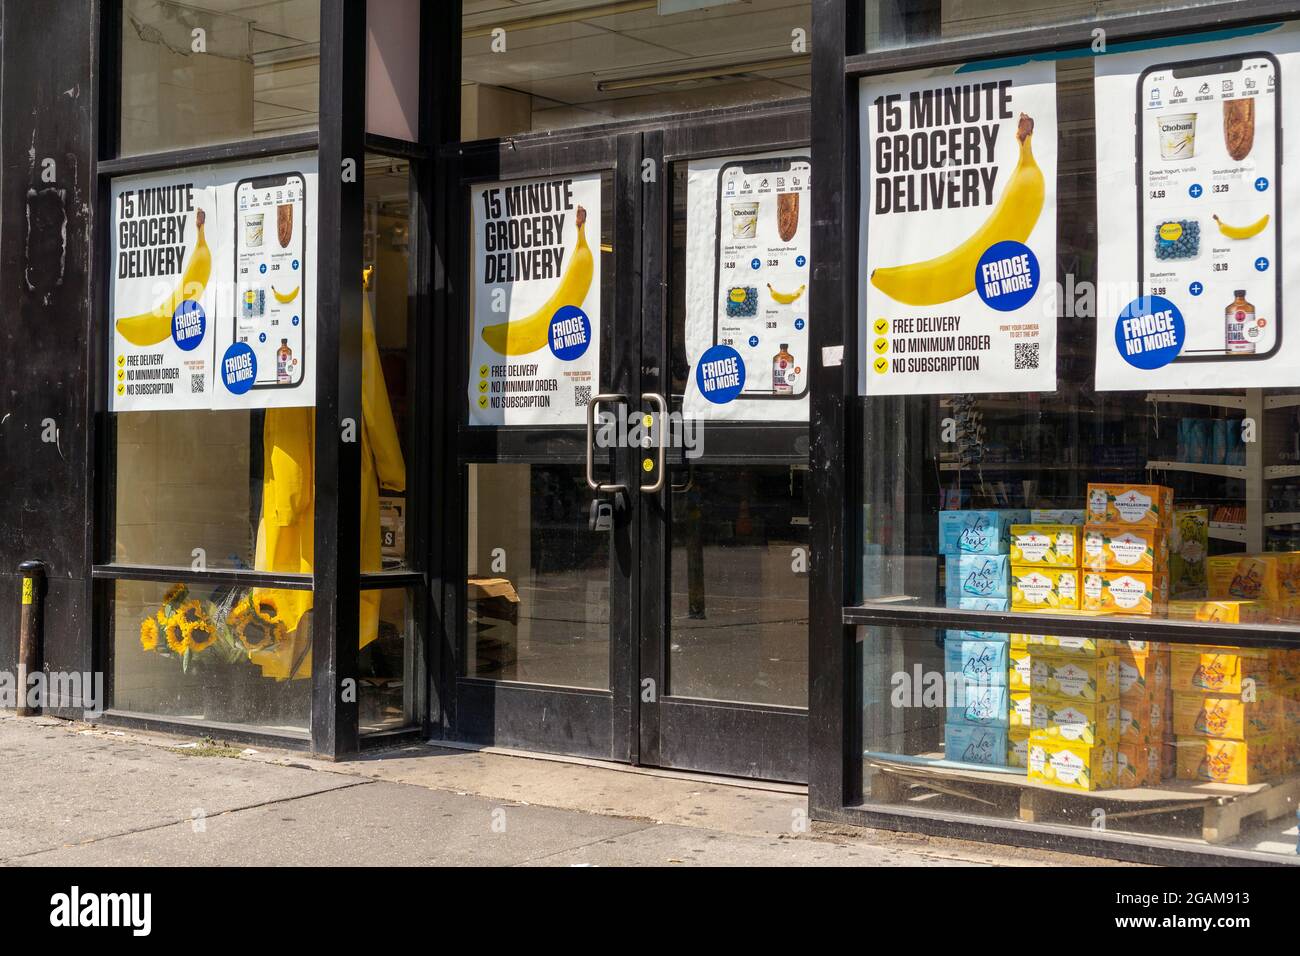 A distribution store for grocery delivery service Fridge No More in the Chelsea neighborhood of New York on Wednesday, July 28, 2021. Gorillas, 1520, Jokr and Fridge No More are competing for the instant delivery space in New York. (© Richard B. Levine) Stock Photo